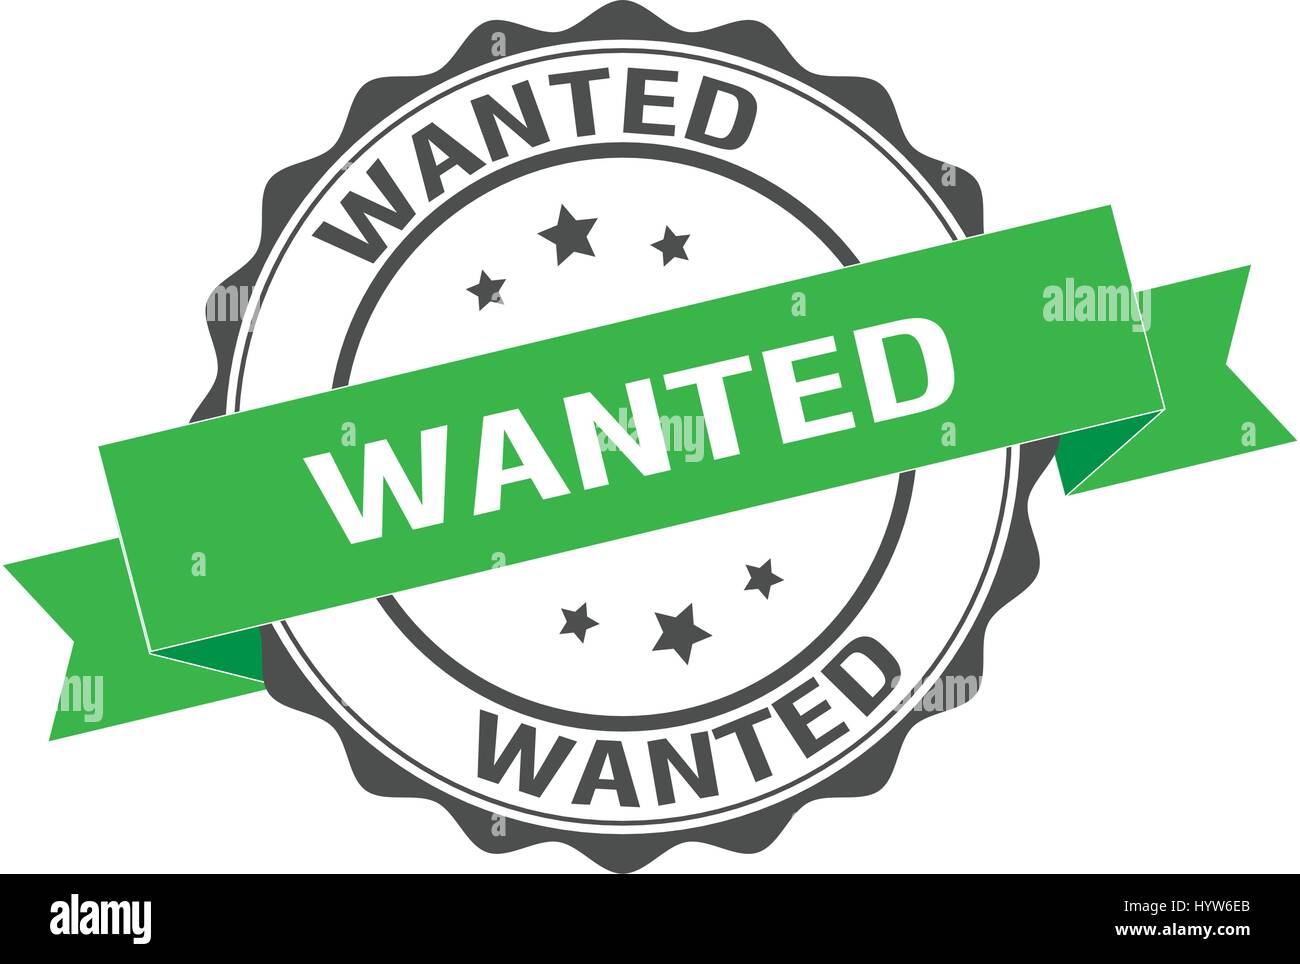 Wanted stamp illustration Stock Vector